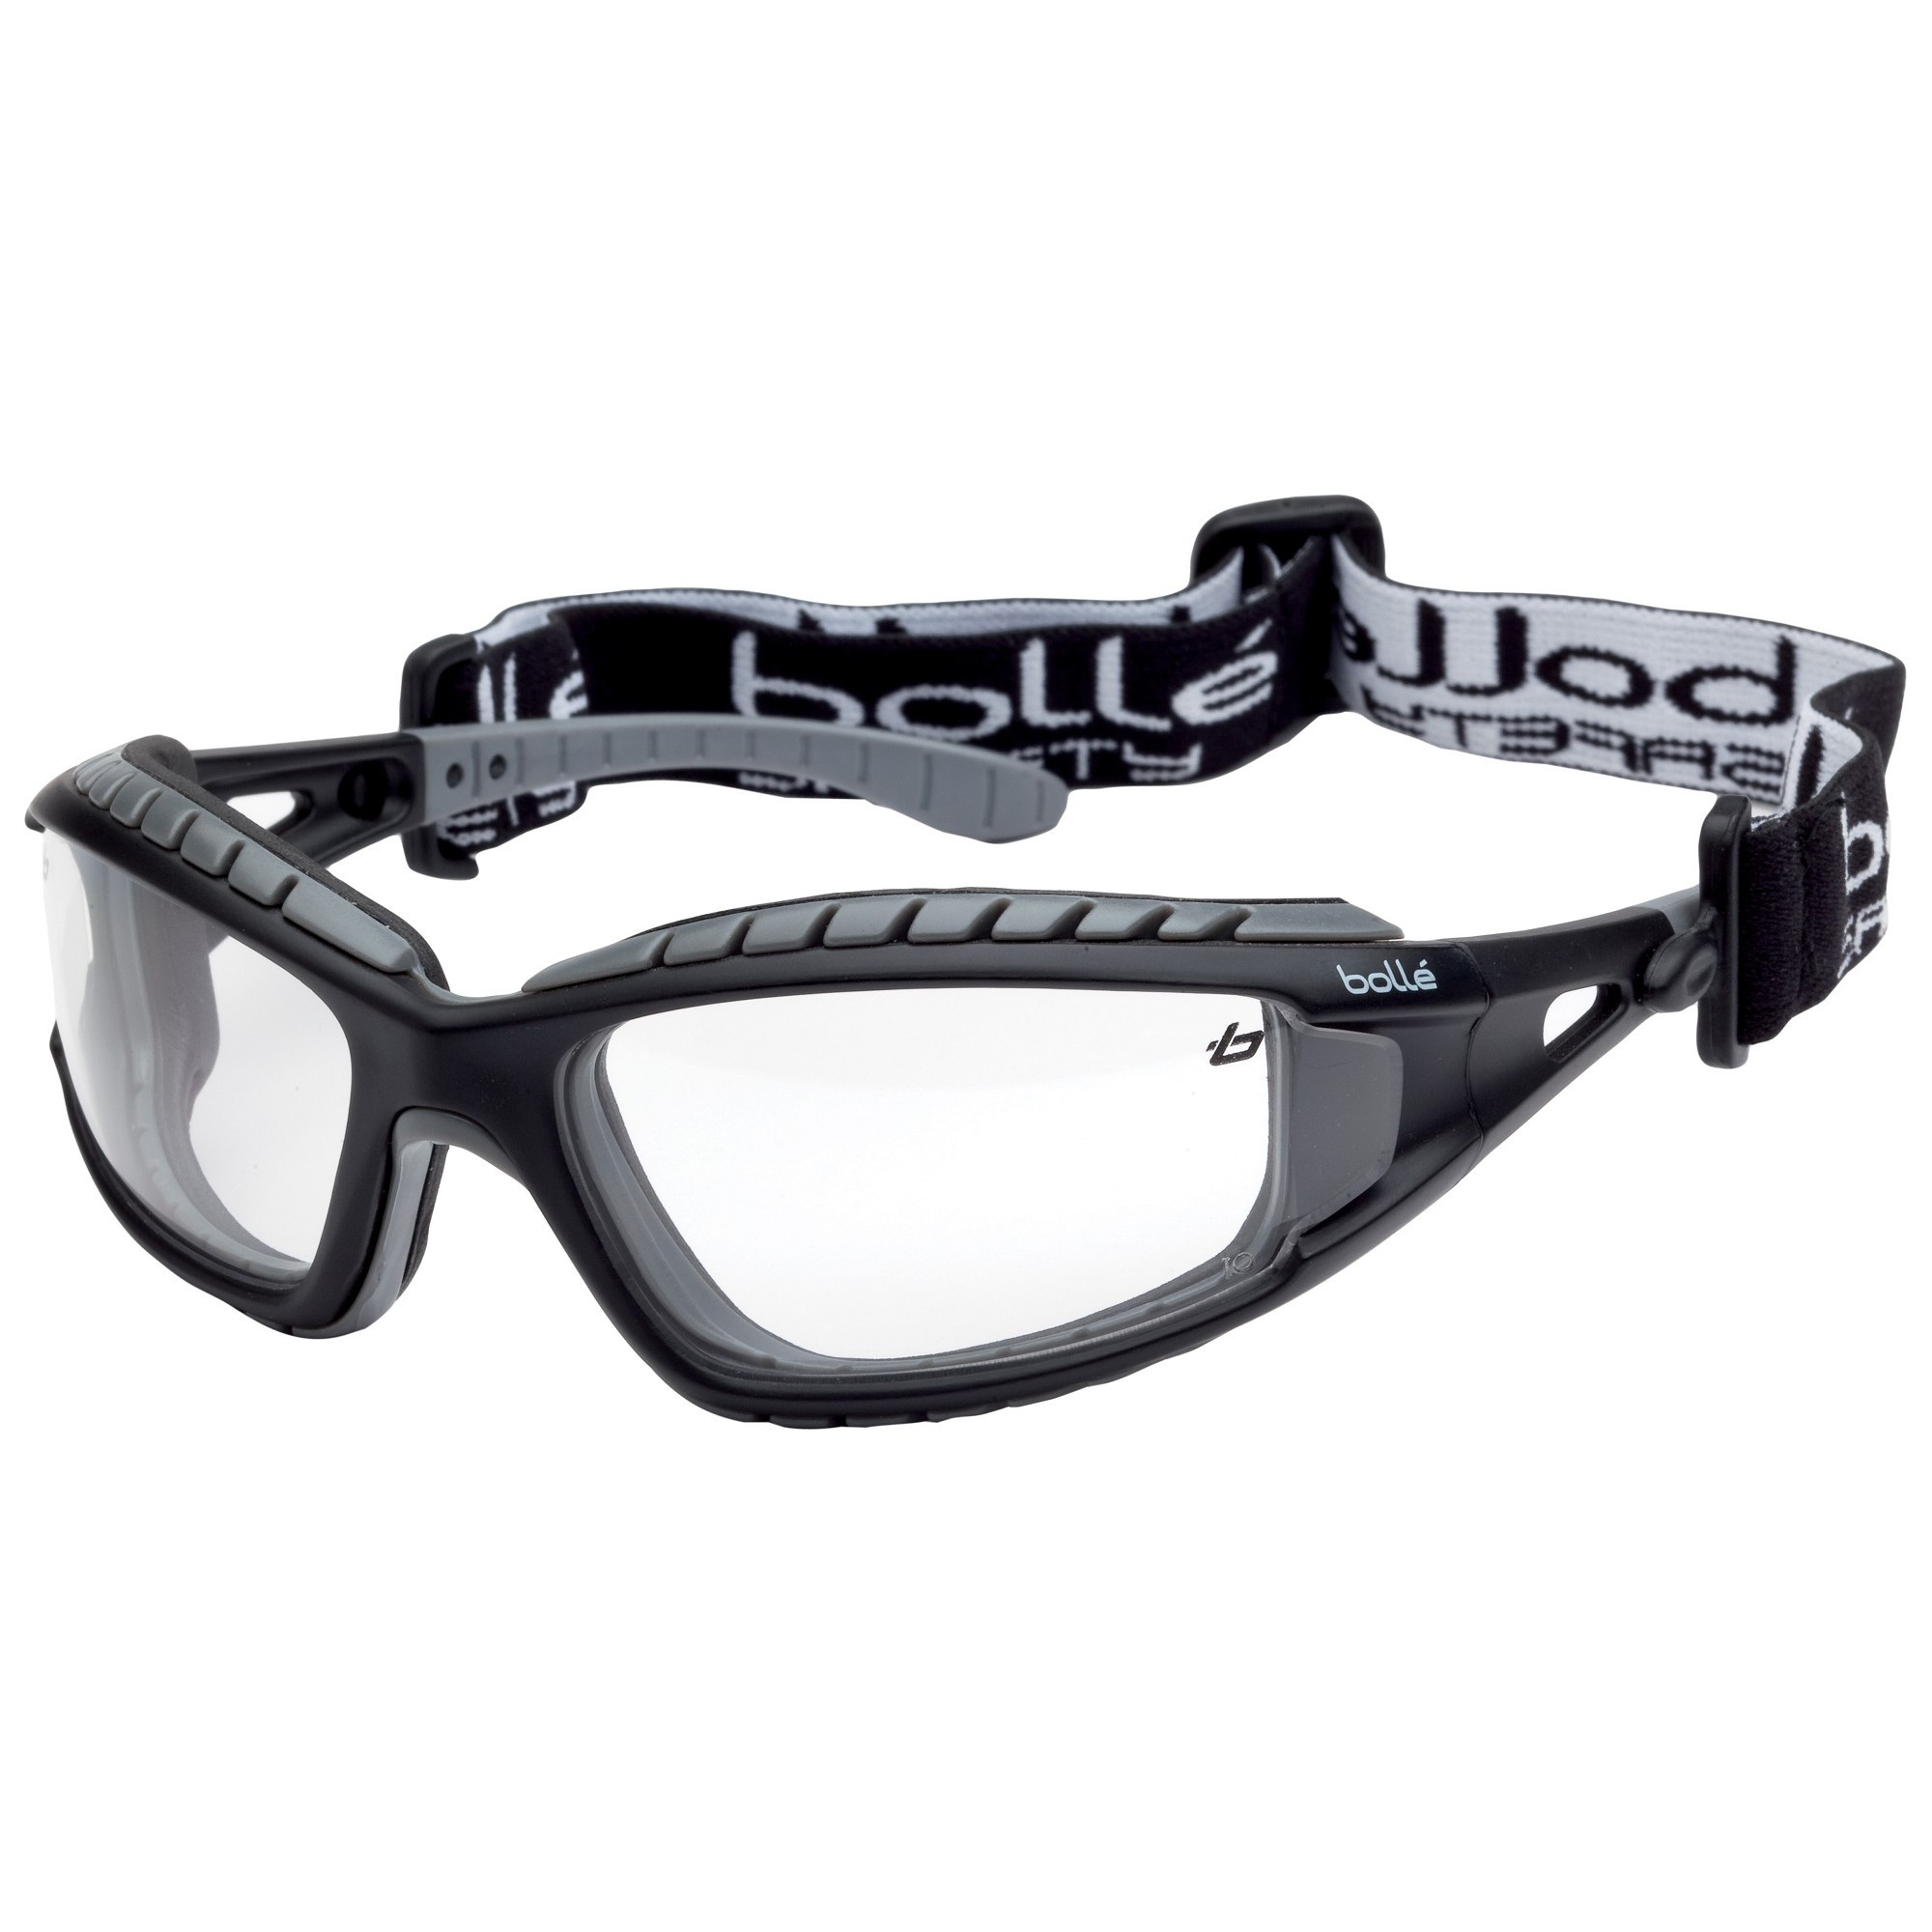 Bolle 40085 Tracker Safety Glasses/Goggles - Black/Grey Temples - Clear ...